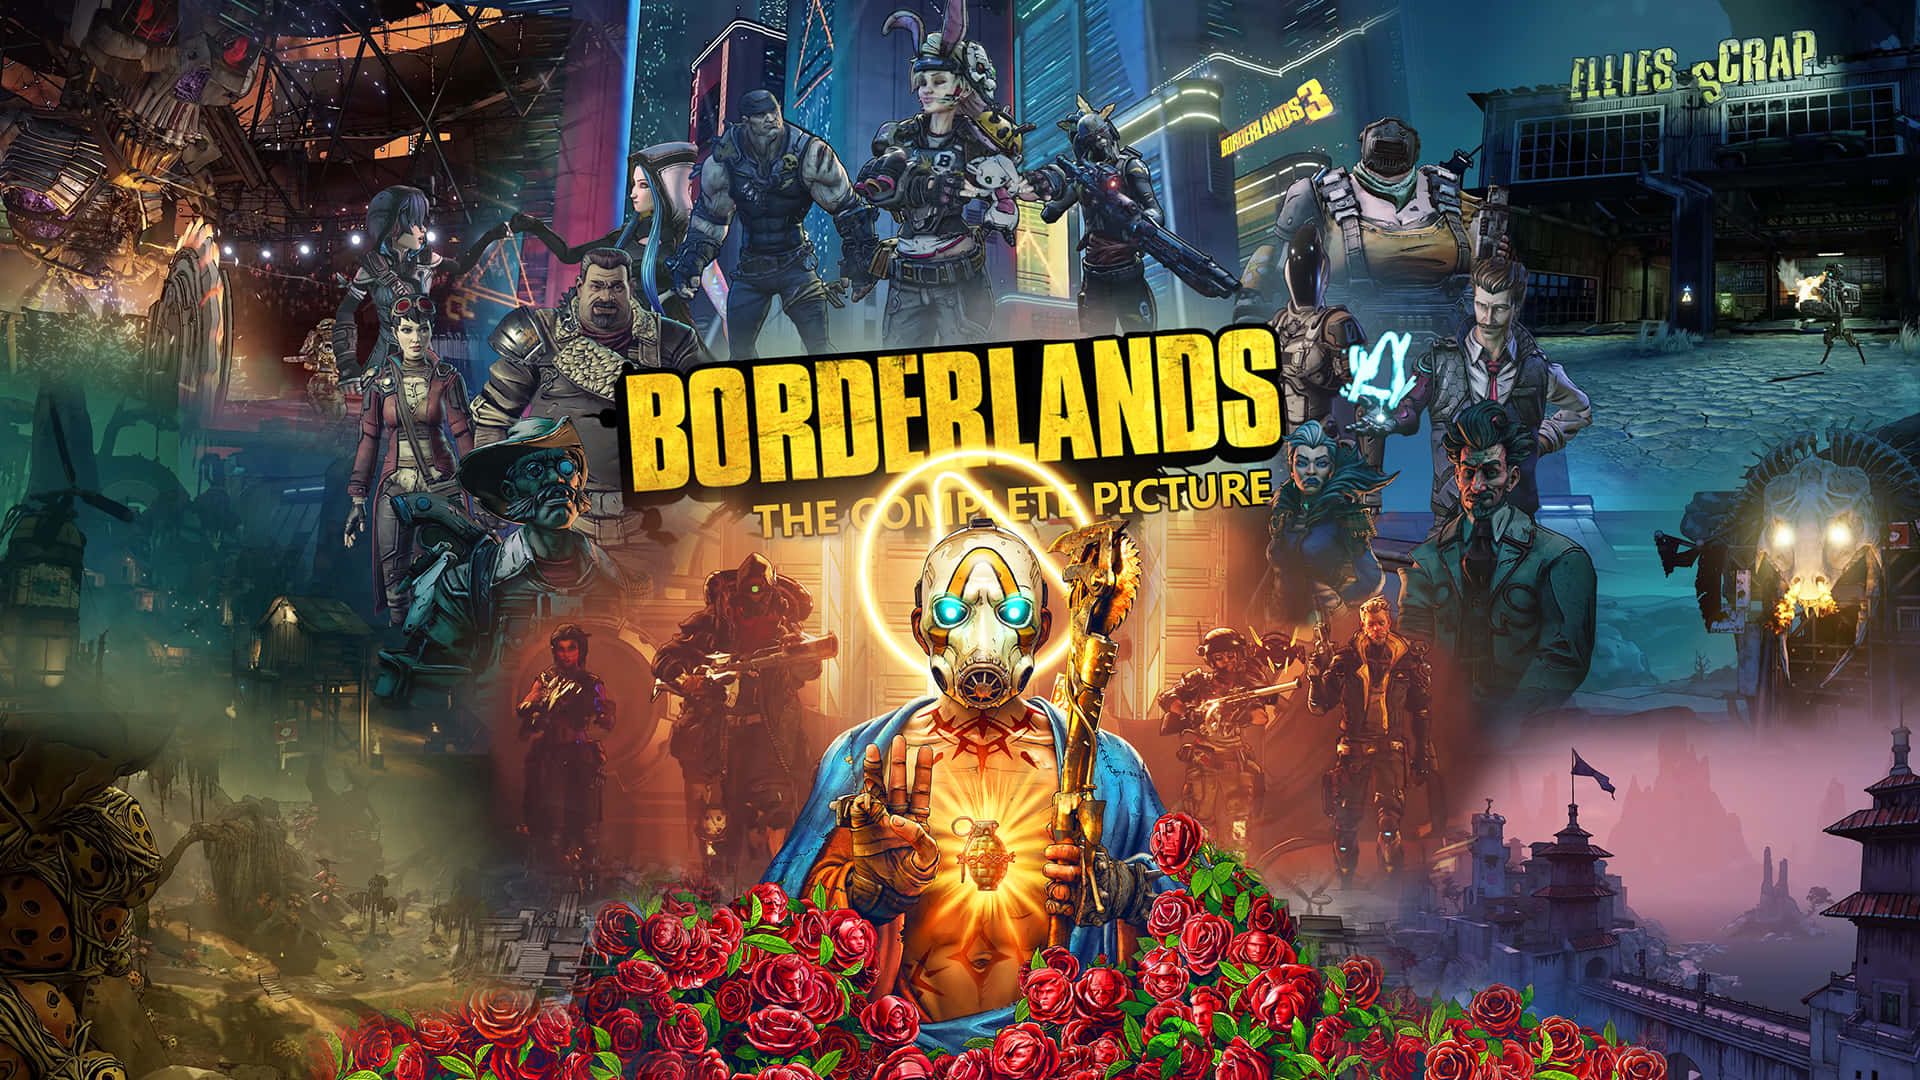 Get ready for some intense gaming action with Borderlands 3